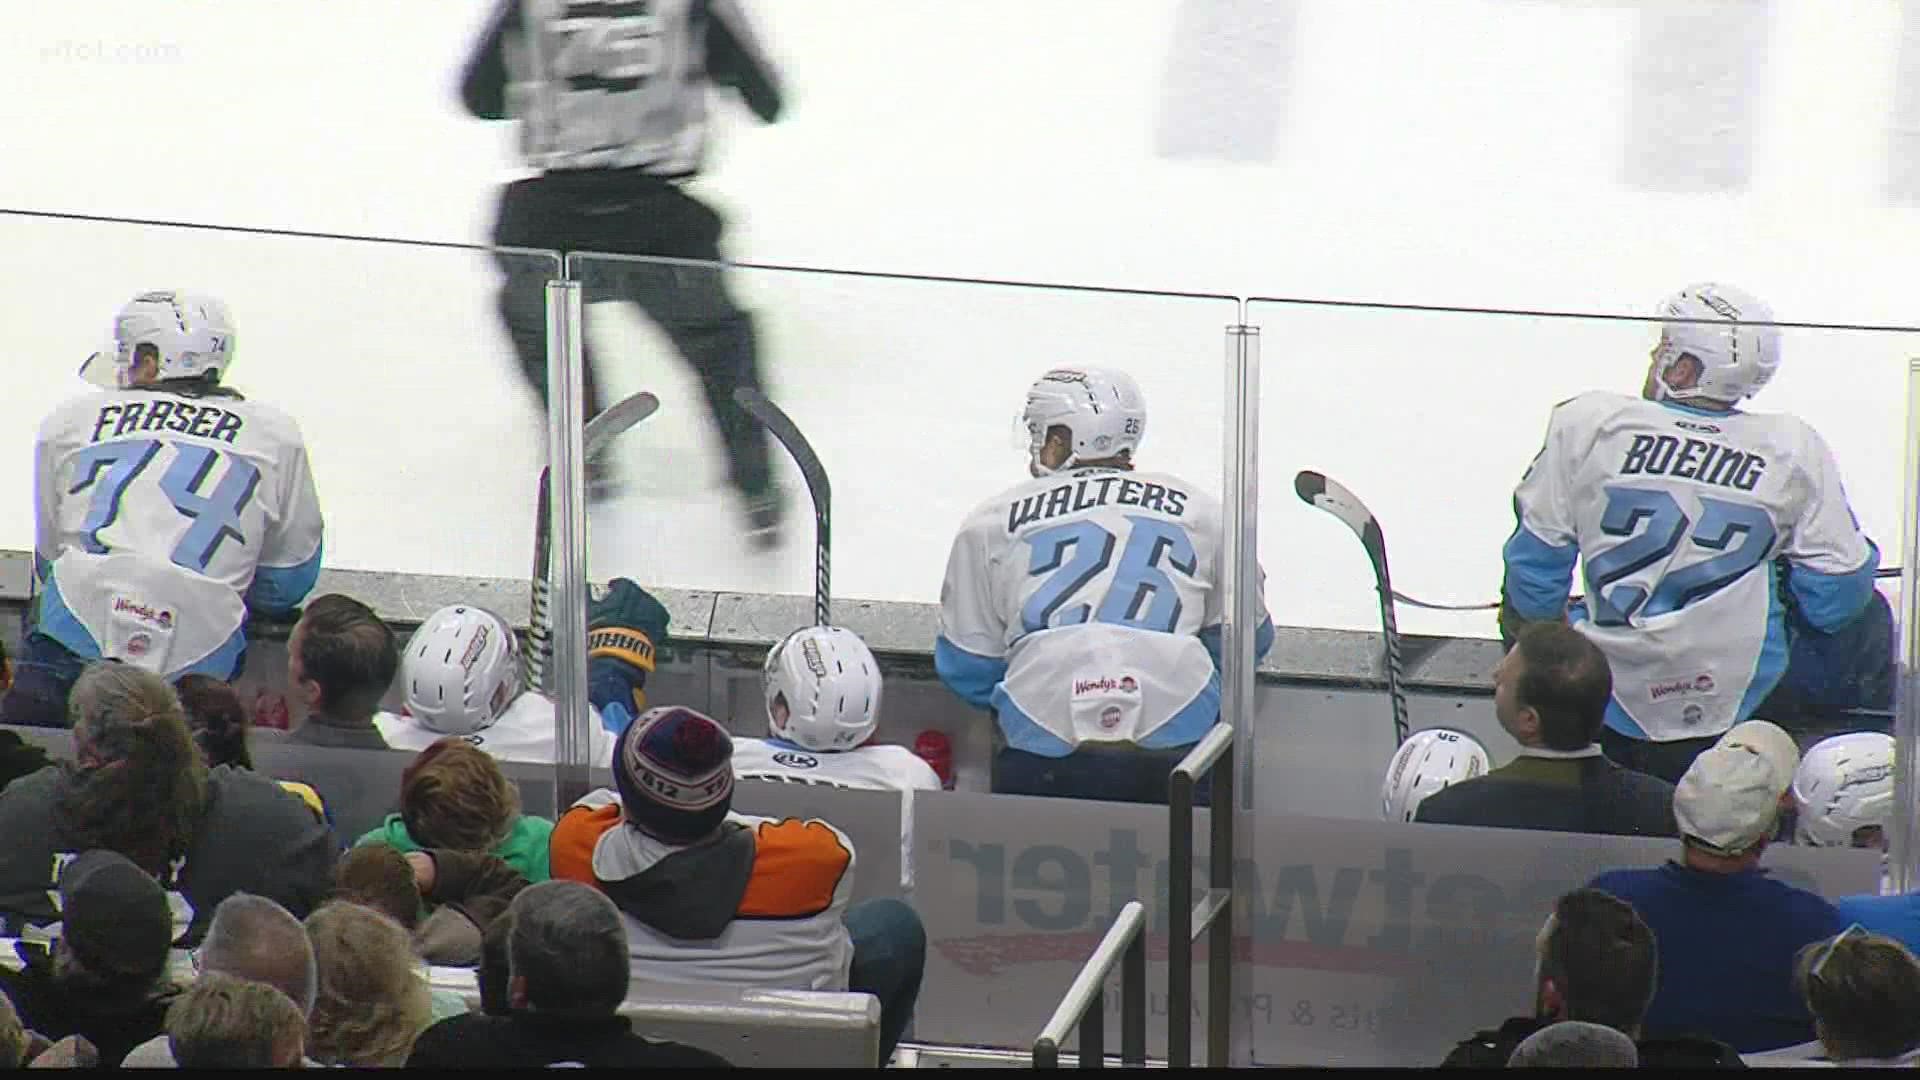 The Toledo Walleye rout the Komets 7-2 in their first game back indoors since Winterfest.